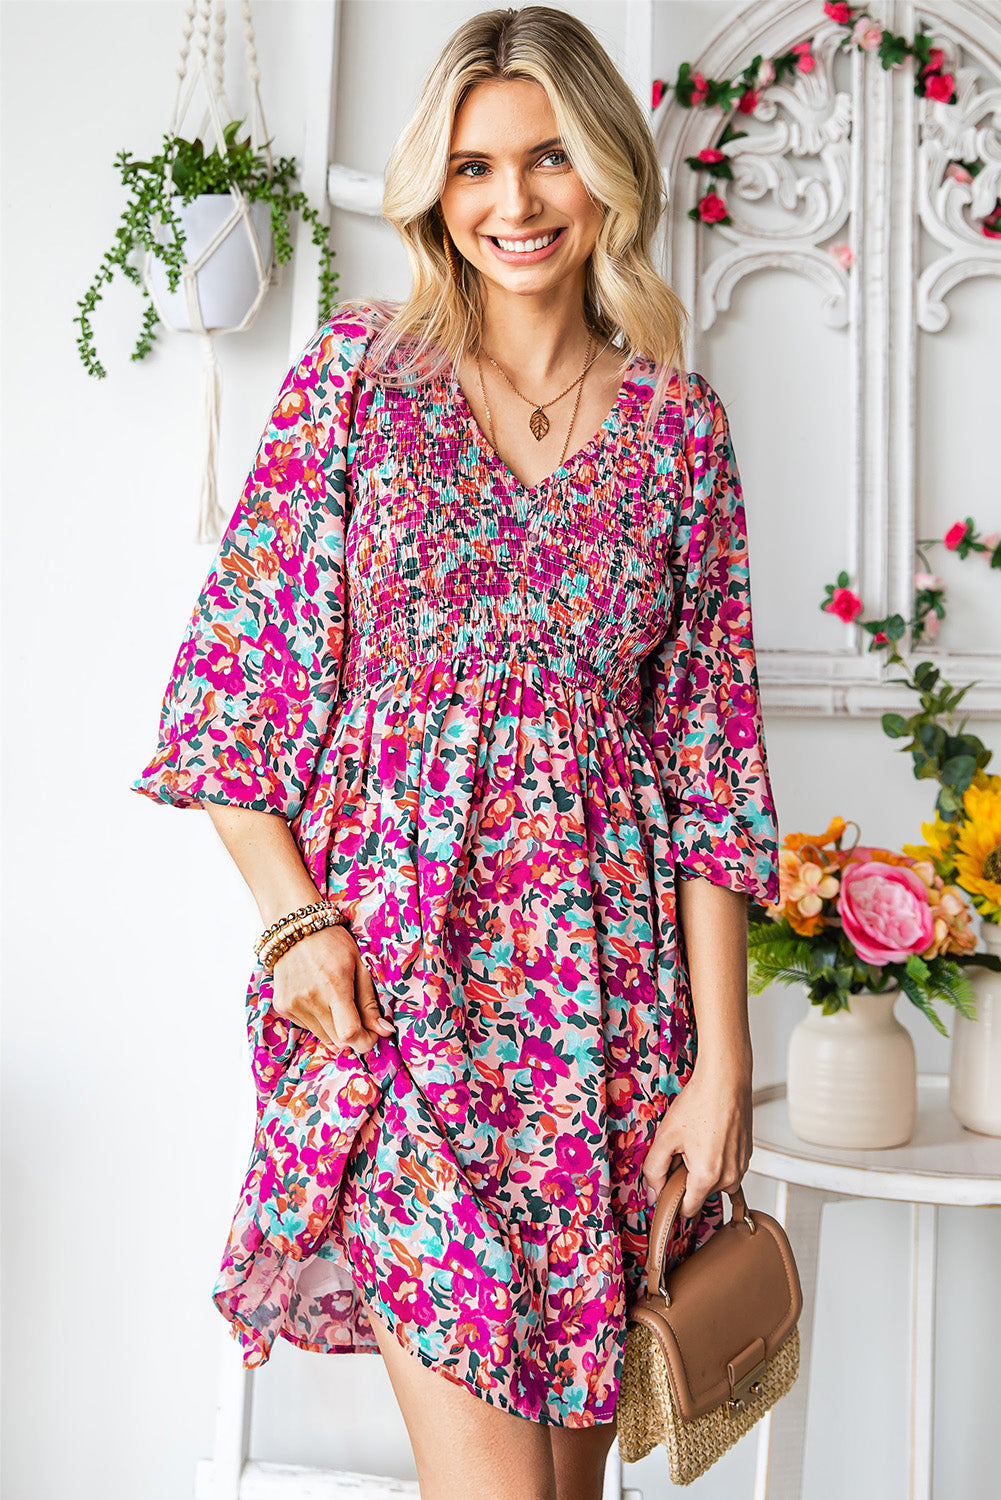 Chic Floral Dress: Perfect for Summer Beach Weddings and Parties!